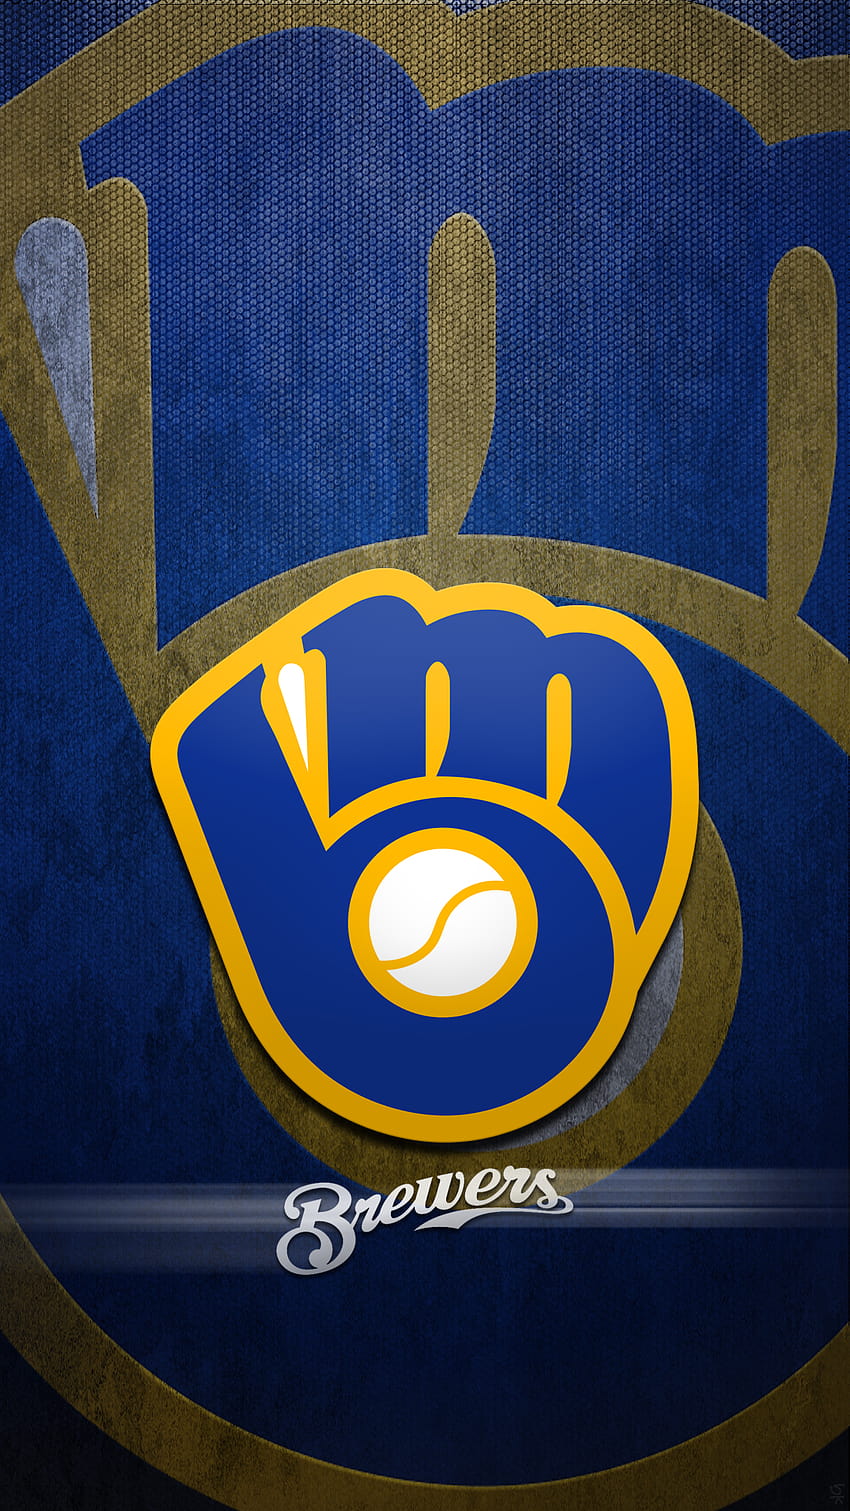 Best 4 Brewers on Hip, retro brewers logo HD phone wallpaper